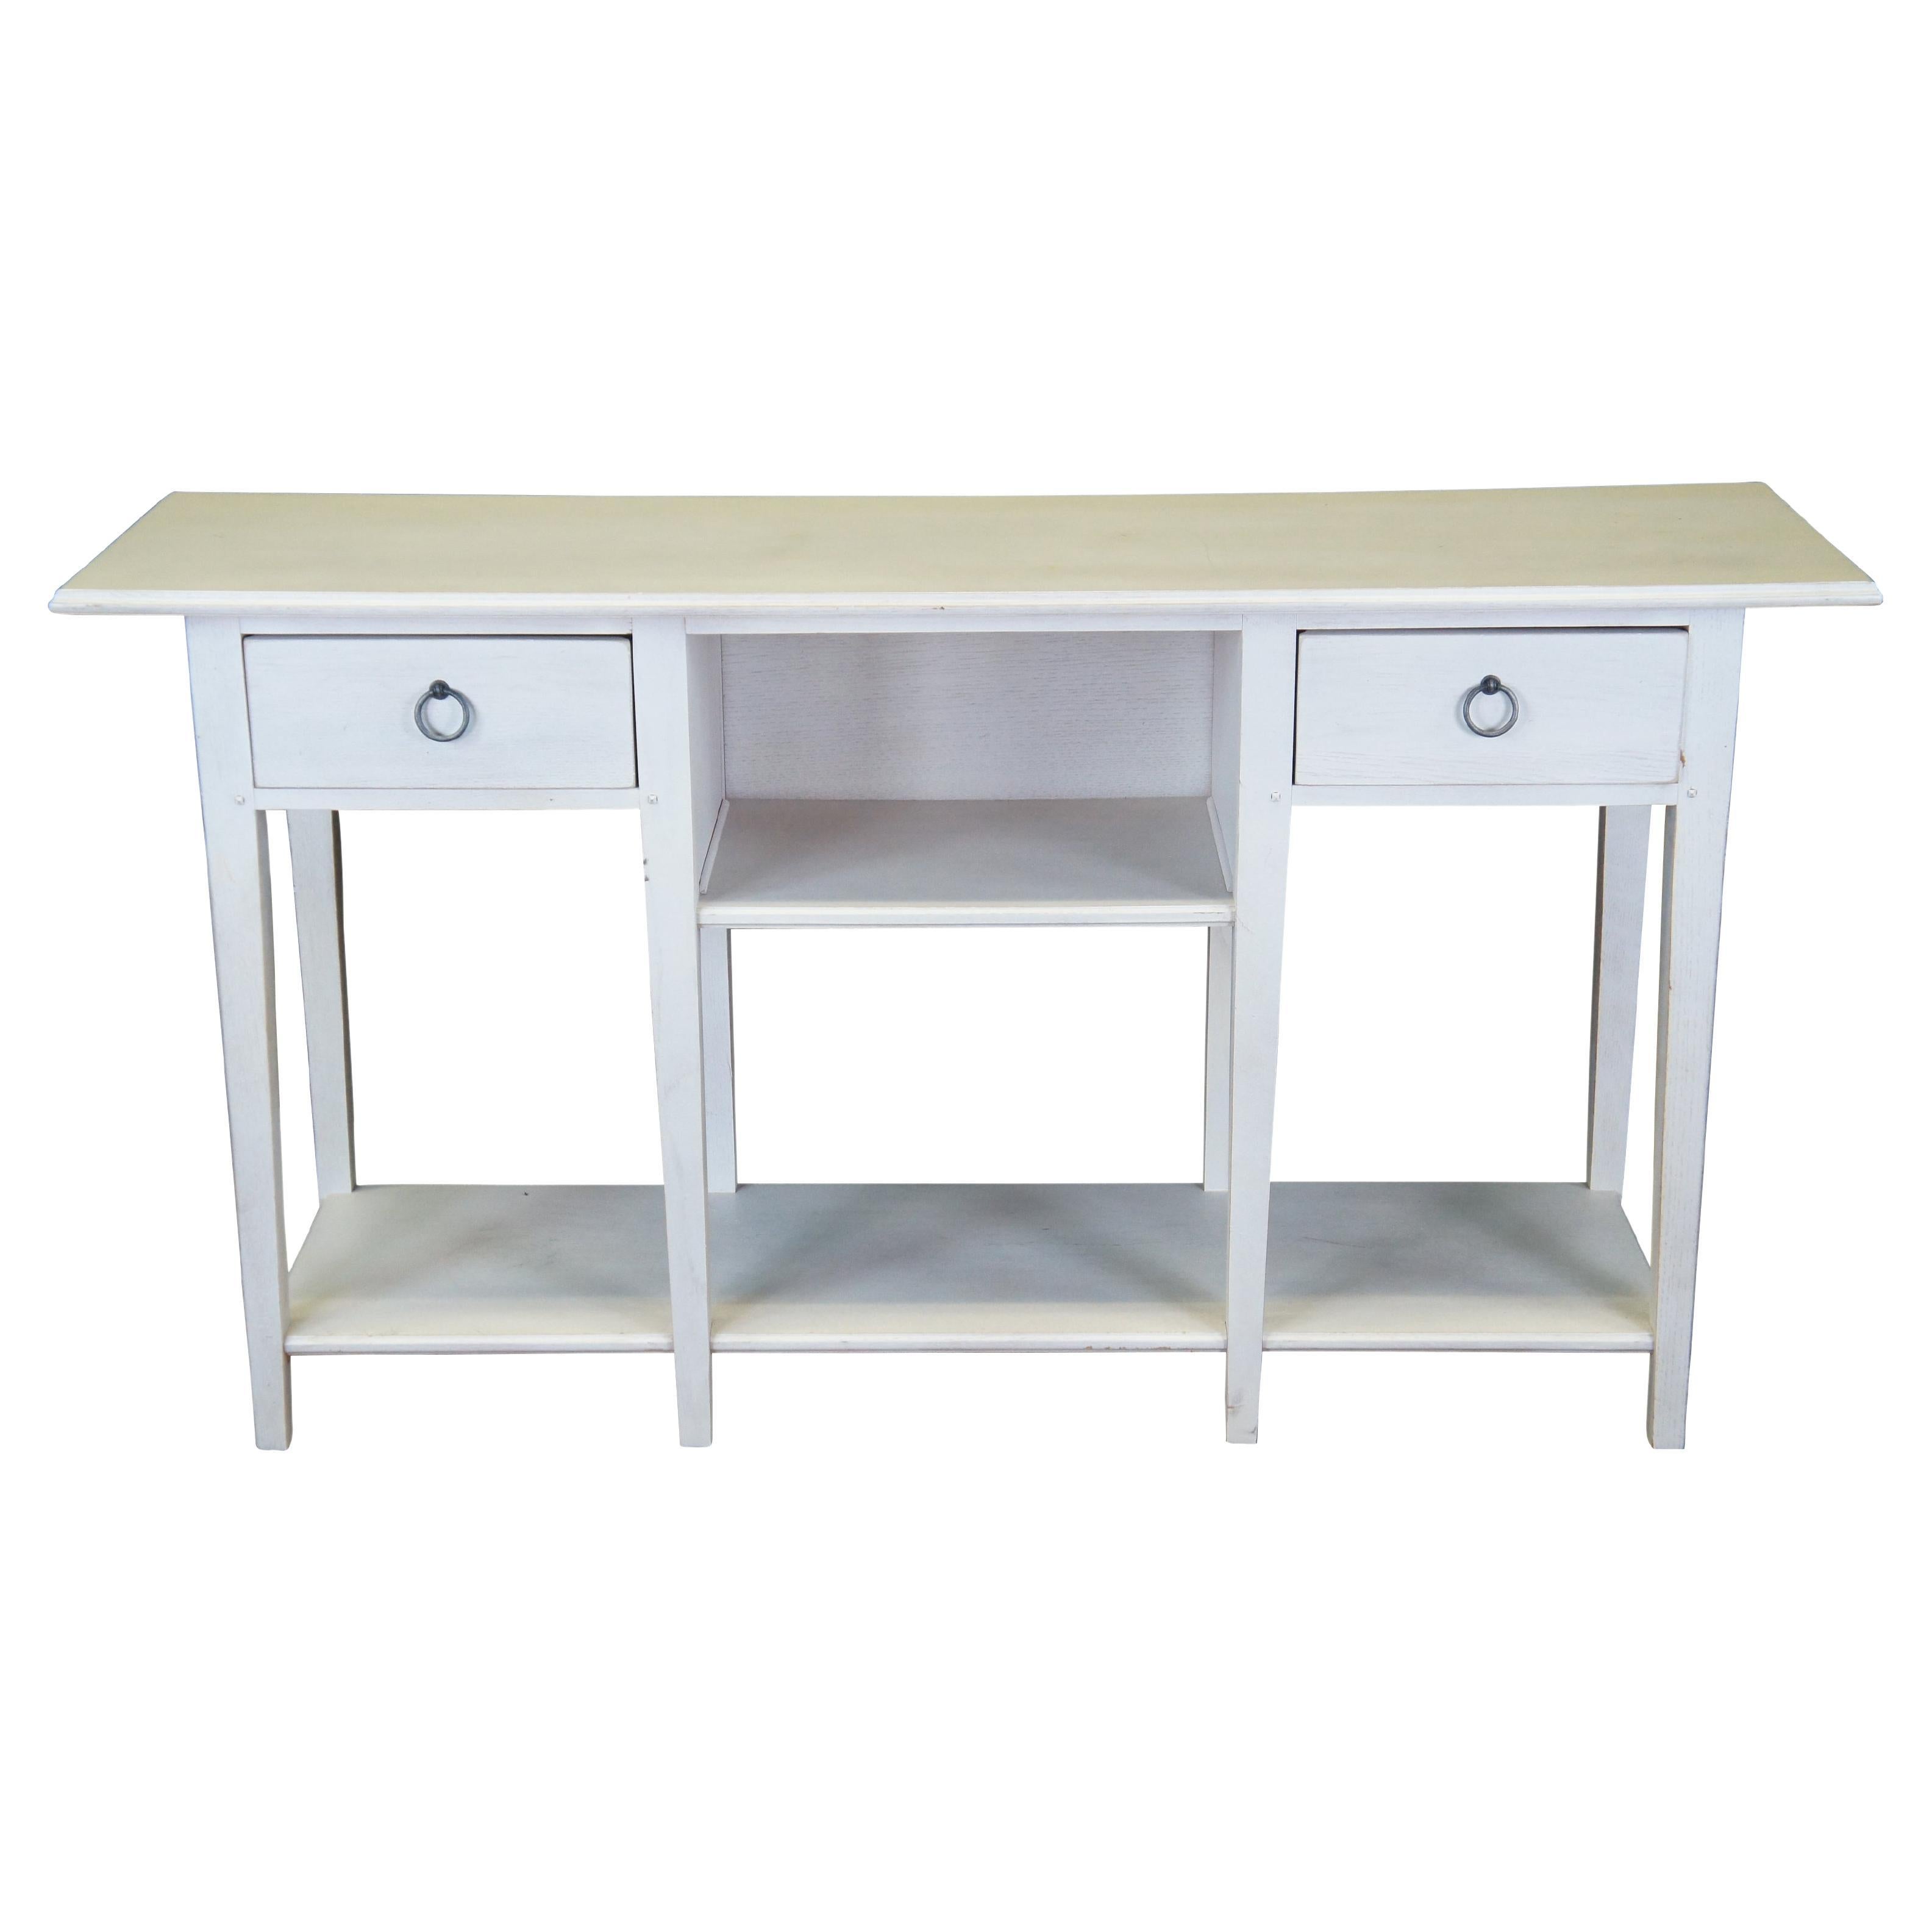 Lexington Furniture Painted Oak White Sideboard Entry Hall Sofa Console Table For Sale